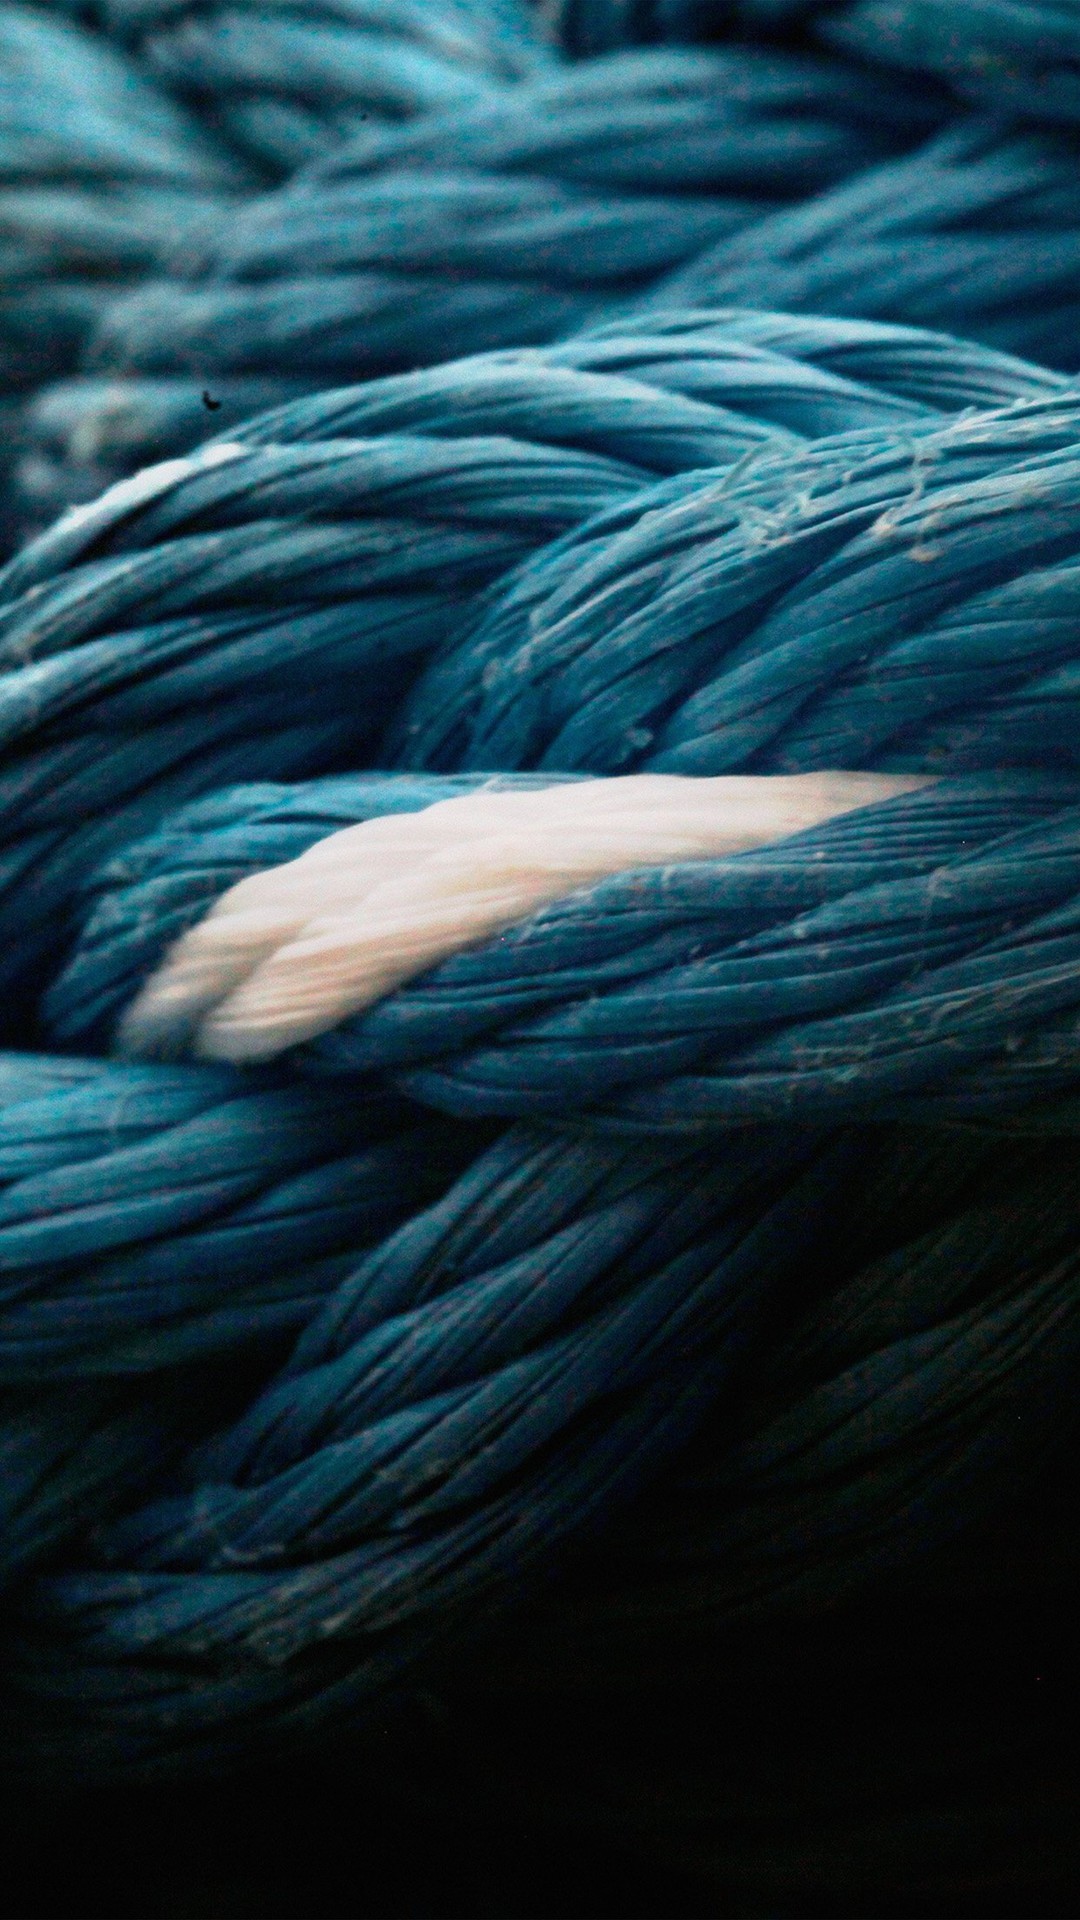 Rope Blue Knot Texture #iPhone #7 #wallpaper